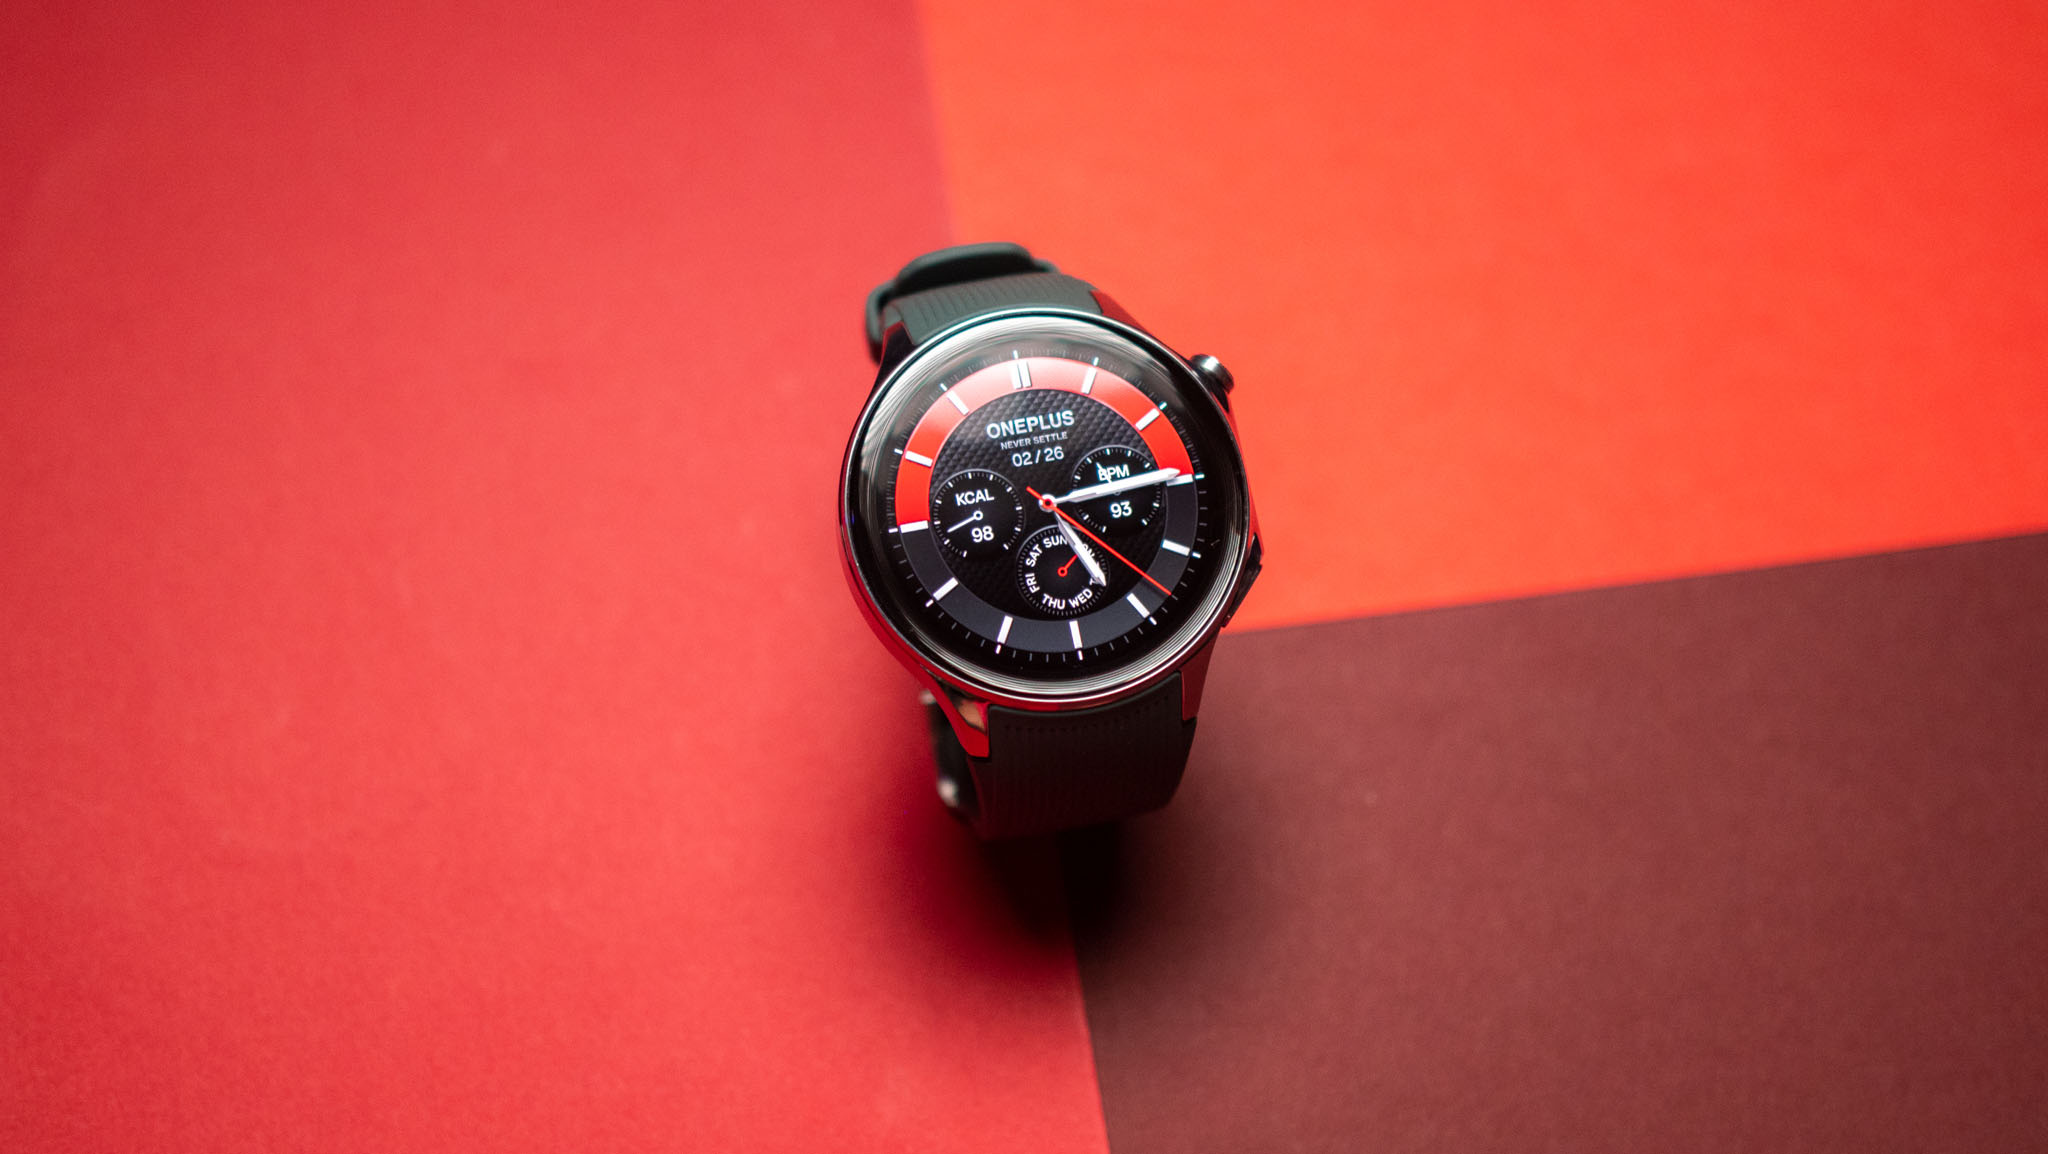 OnePlus Watch 2 review: Amazing Wear OS battery life, annoying software issues